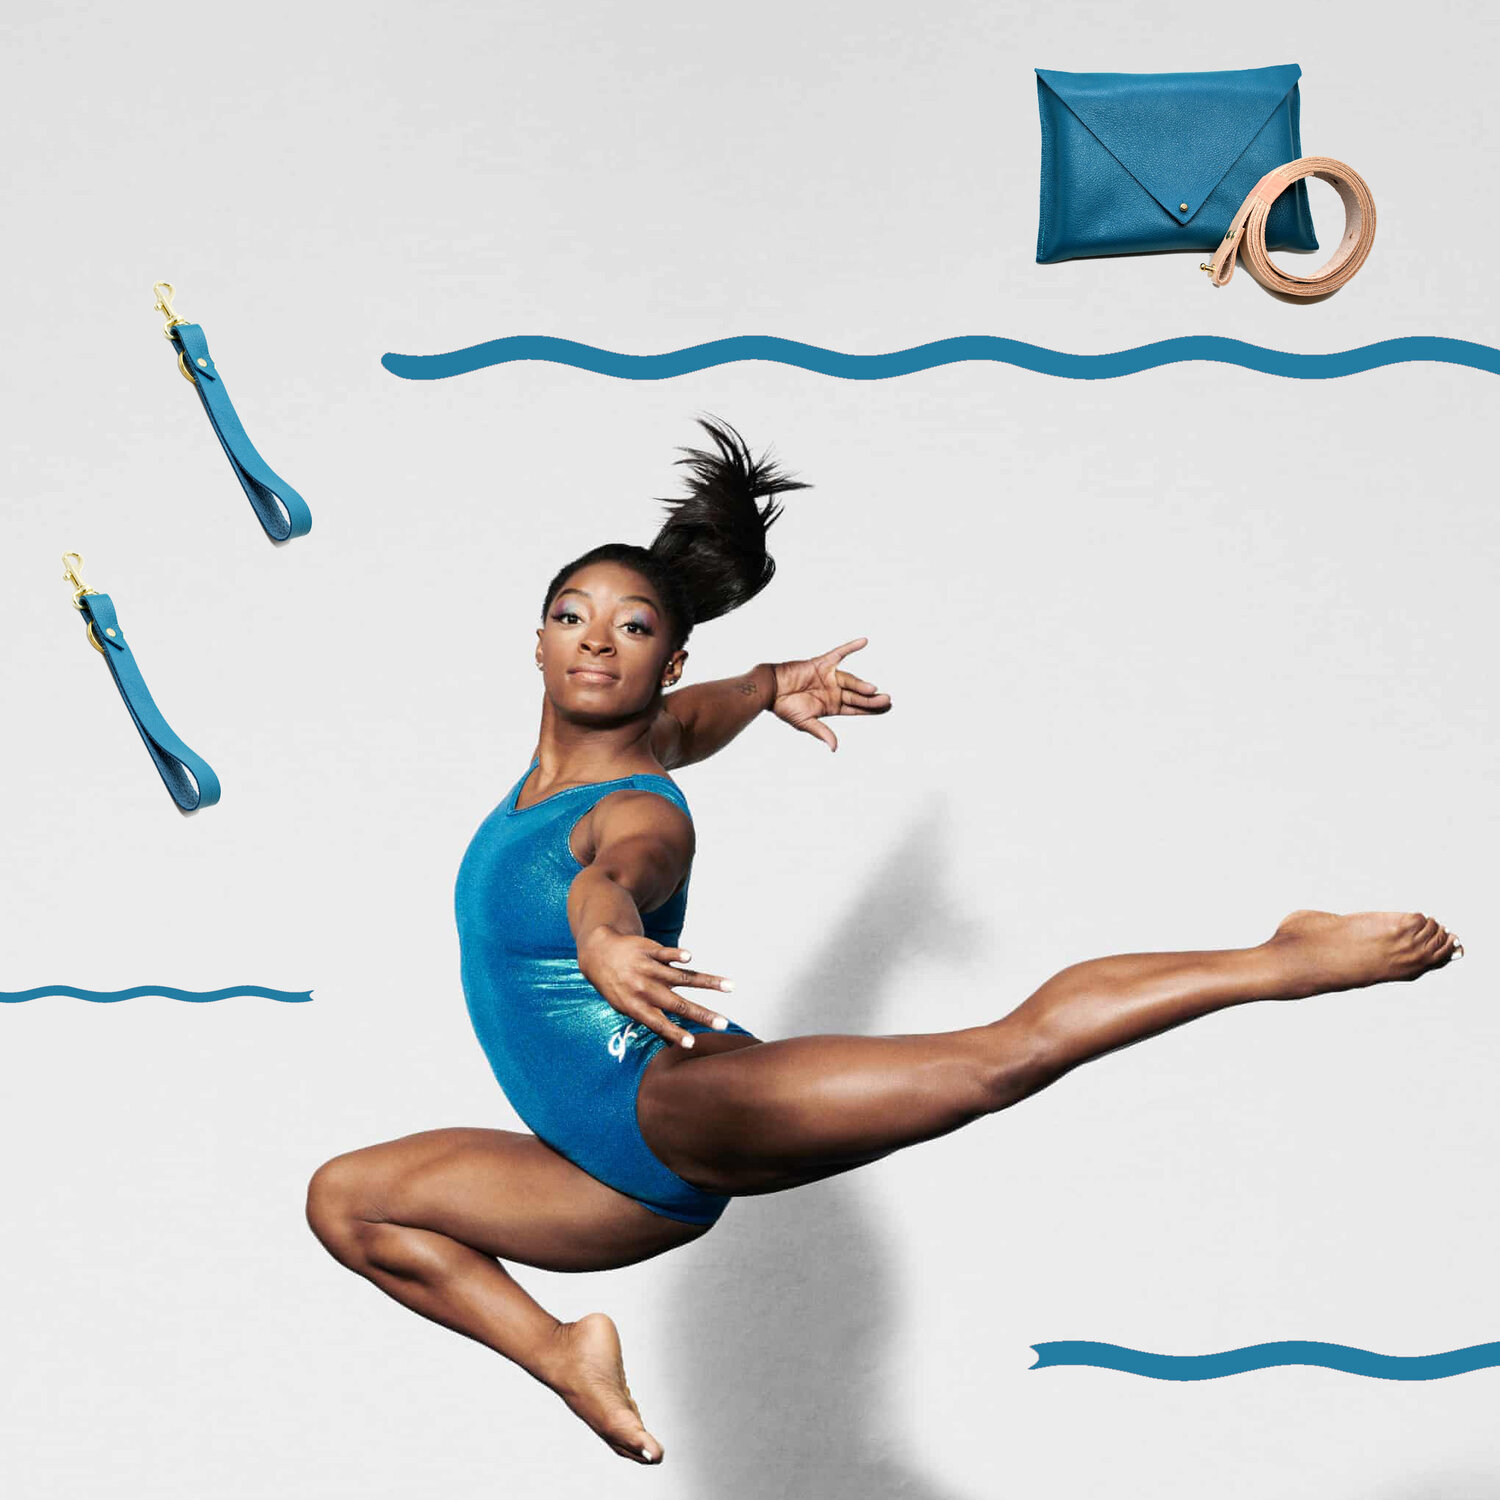 Simone Biles showing us how a winner wears - and accessorizes in - turquoise like a Pisces.